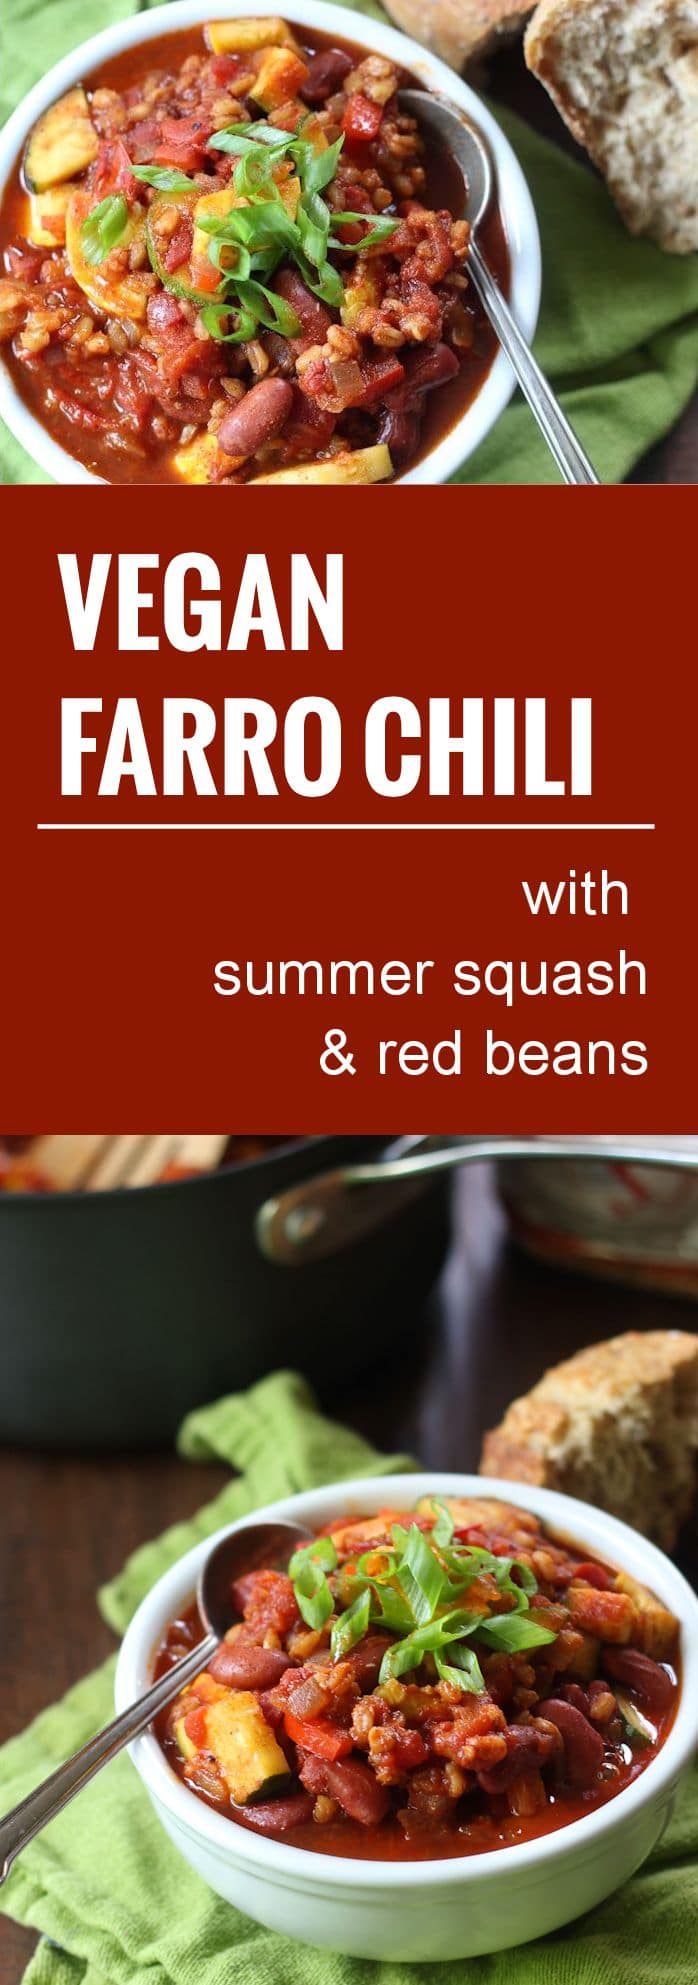 Farro Chili with Summer Squash and Red Beans